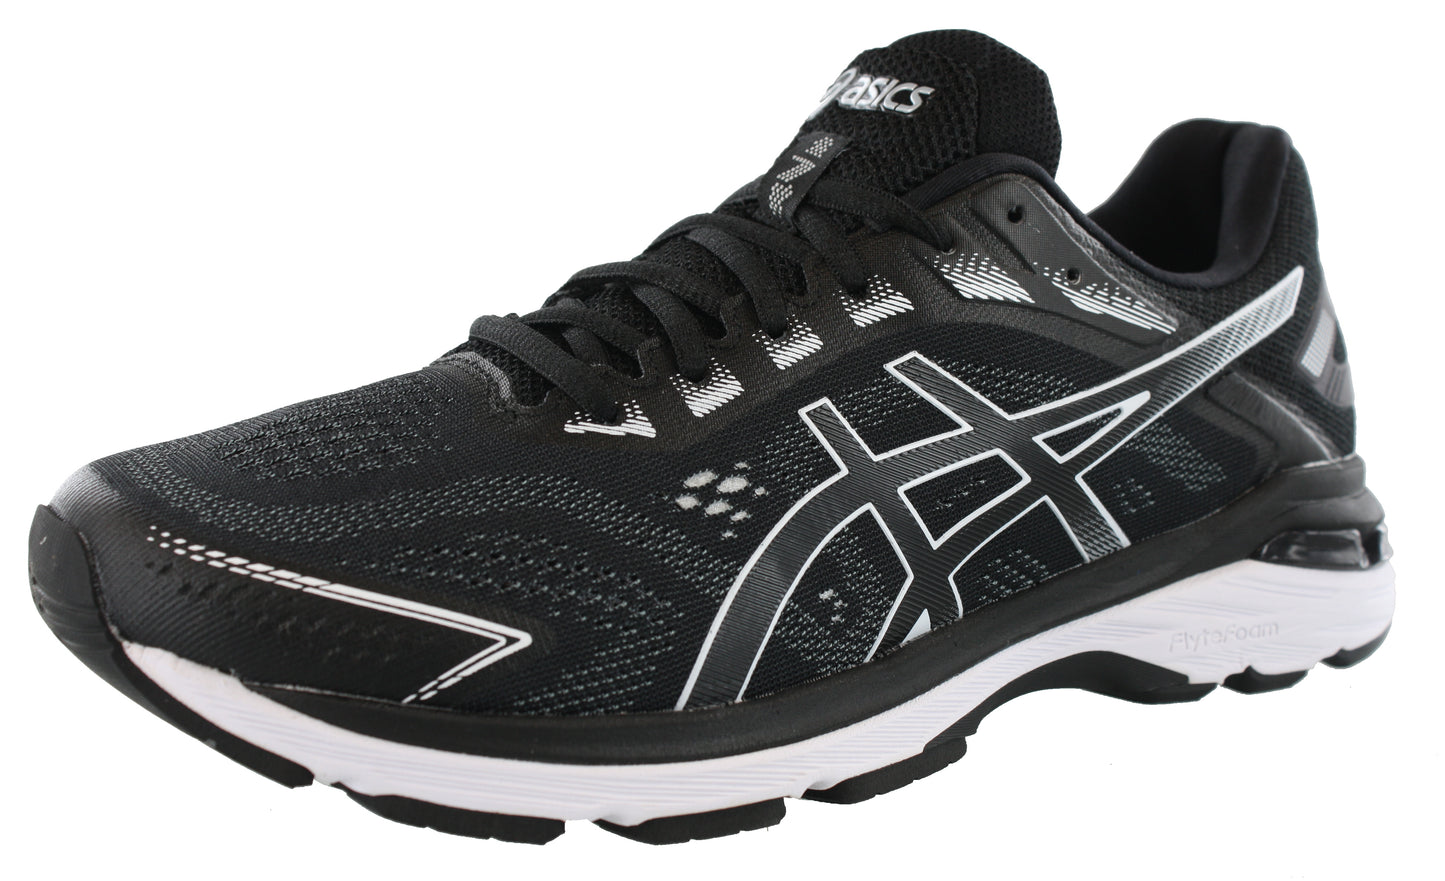 Lateral of Black/White ASICS Men Walking Trail Cushioned Running Shoes GT 2000 7